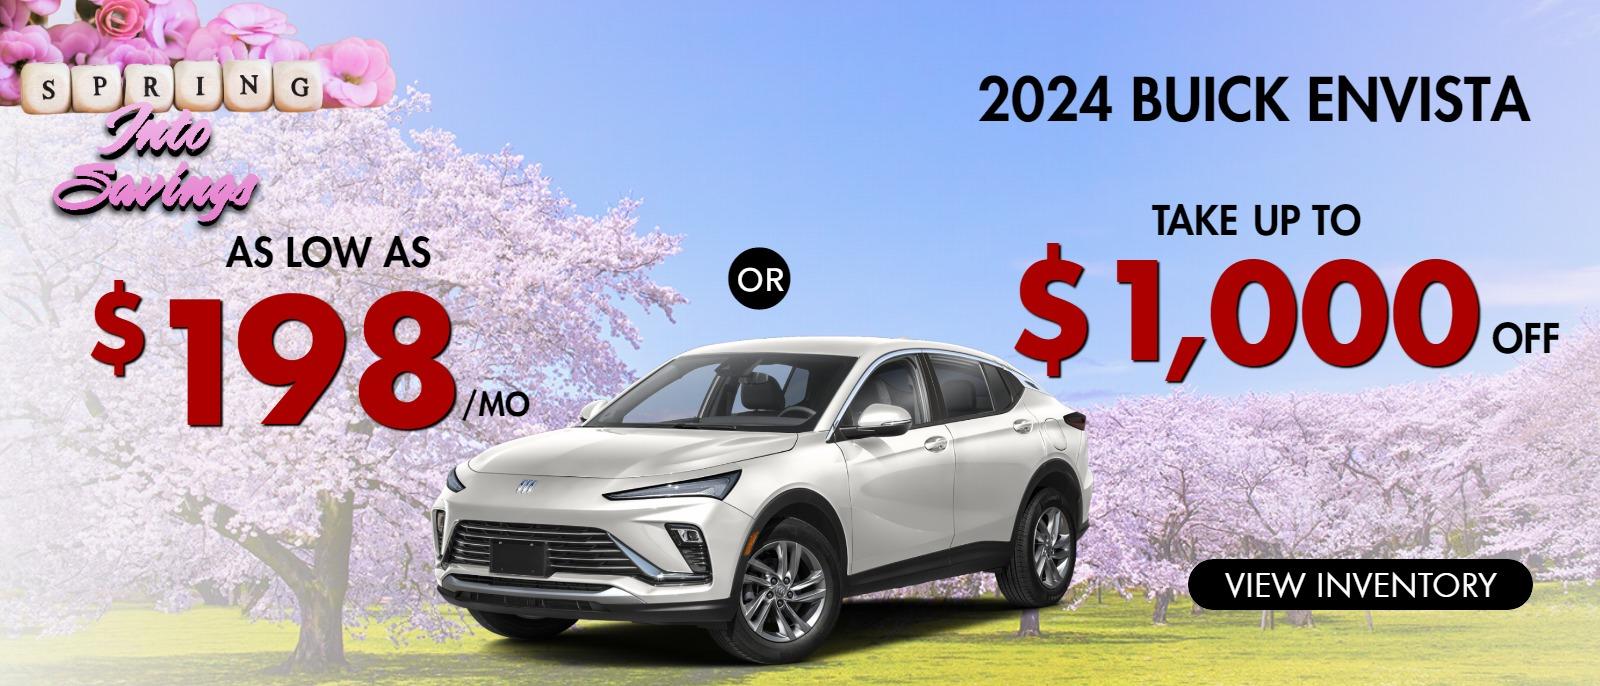 2024 Envista
Stock B1718

AS LOW AS $198/mo 
OR take up to $1,000 OFF